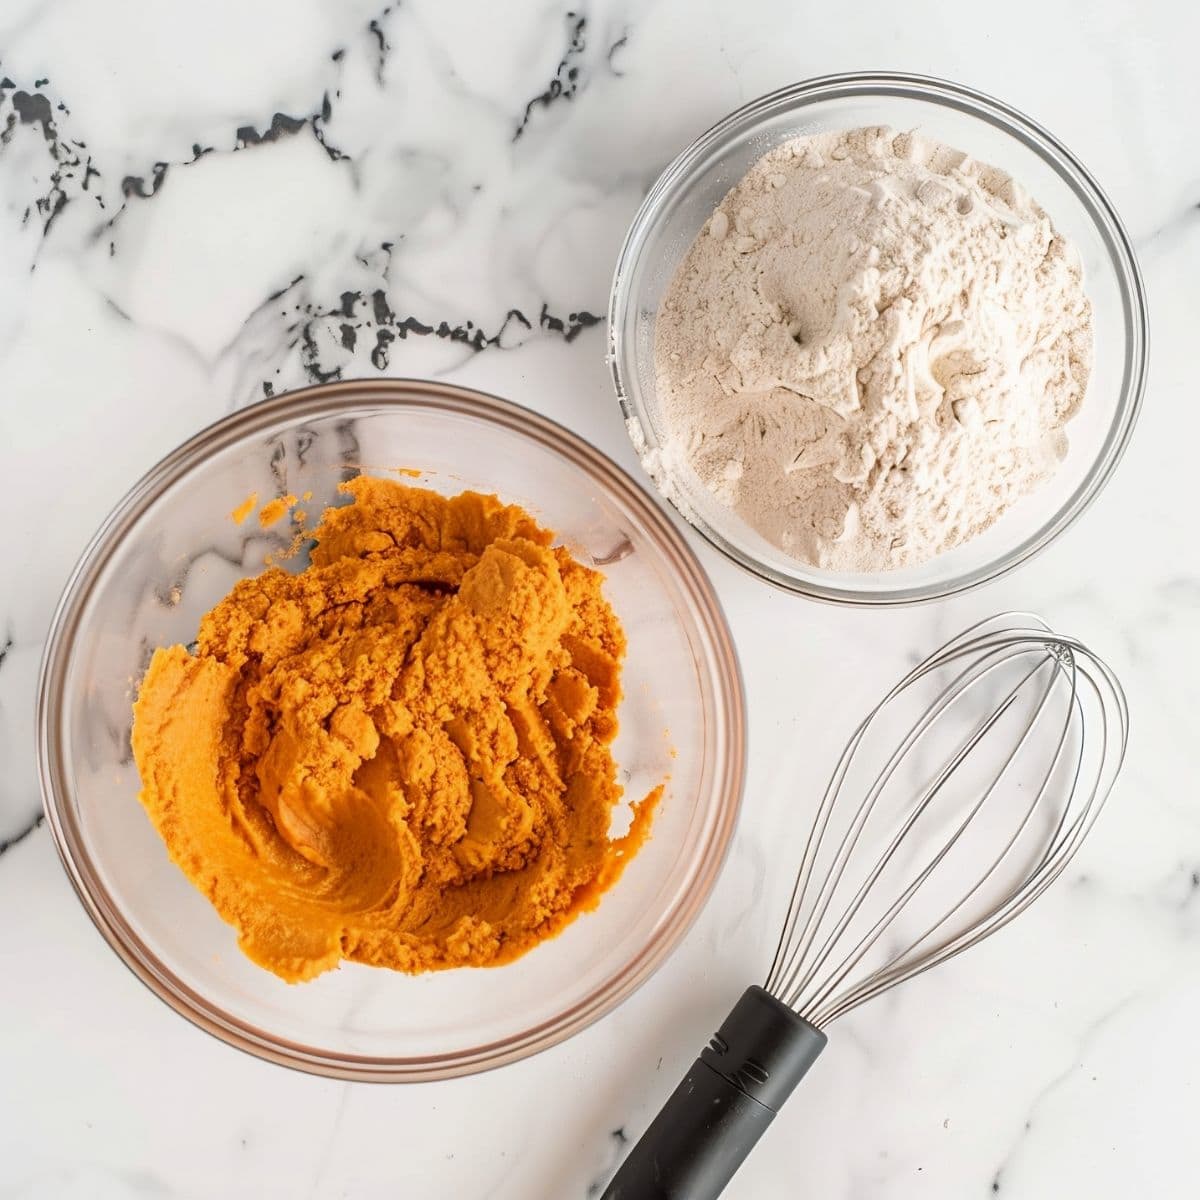 Pumpkin Puree in a Glass Bowl and a Spice Cake Mix in a Separate Glass Bowl on a White Marble Table with a Wire Whisk